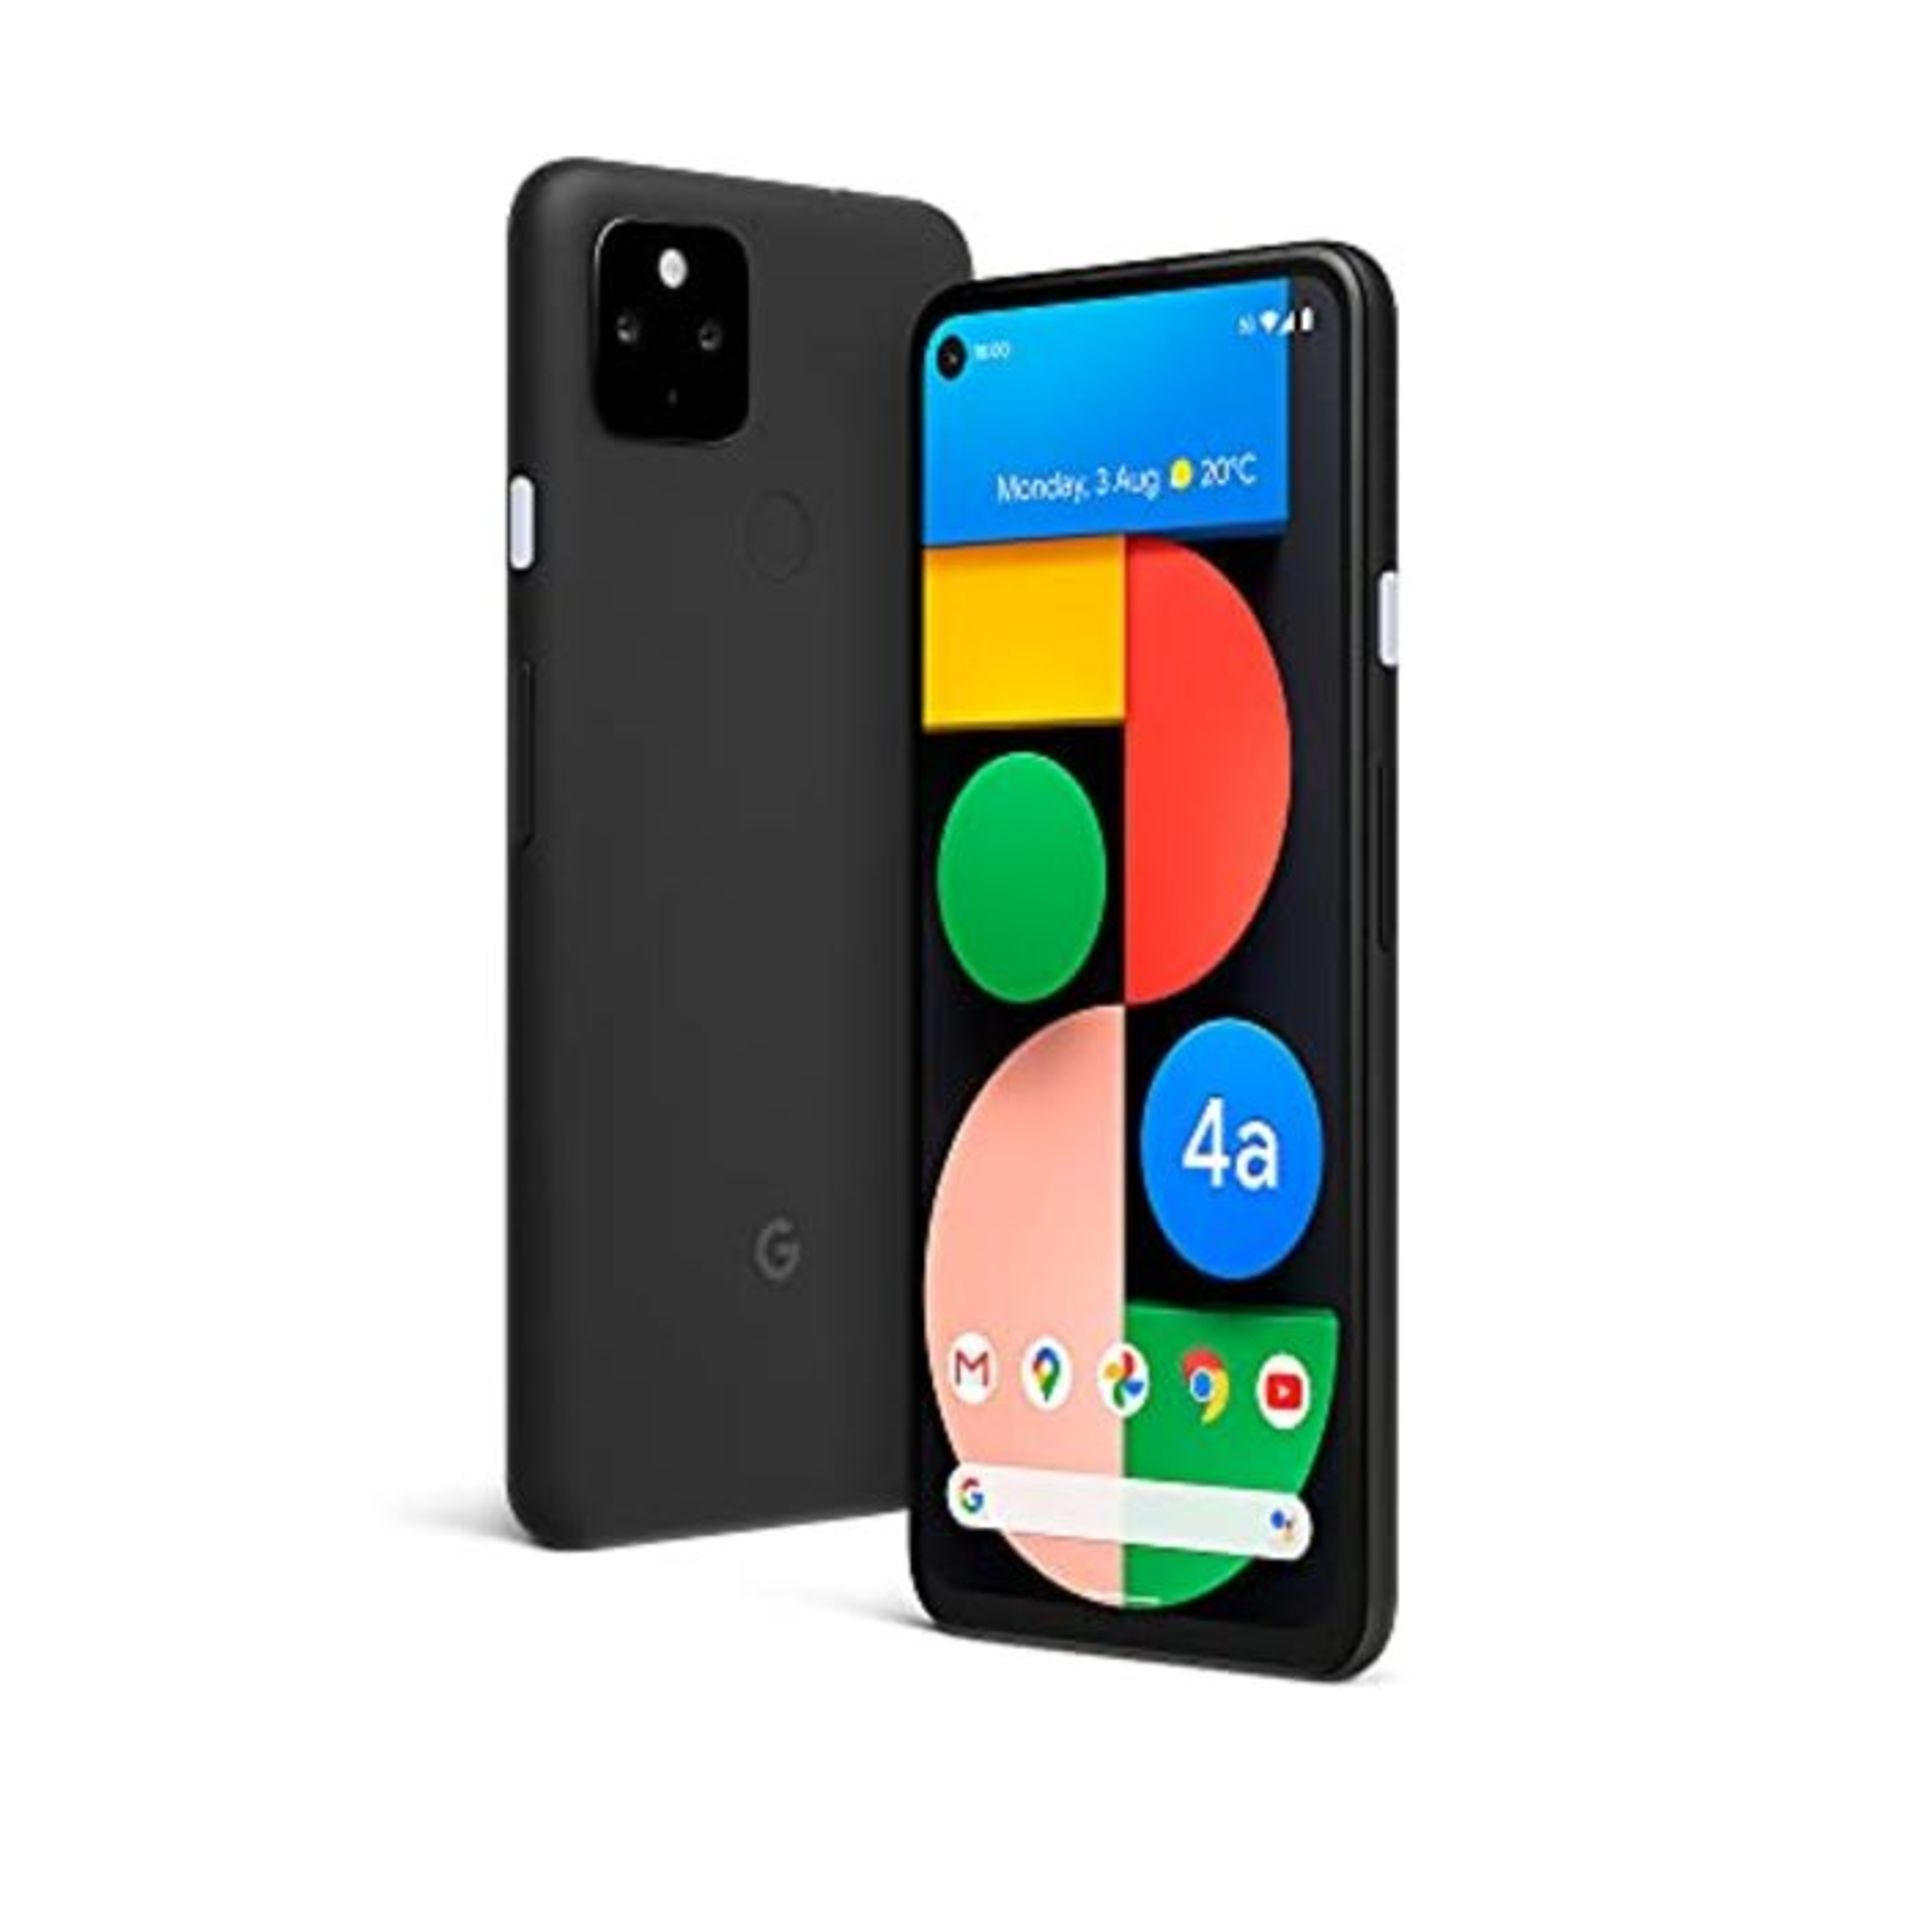 RRP £394.00 Google Pixel 4a 5G Android Mobile phone- 128GB Just Black, SIM Free, Adaptive Battery